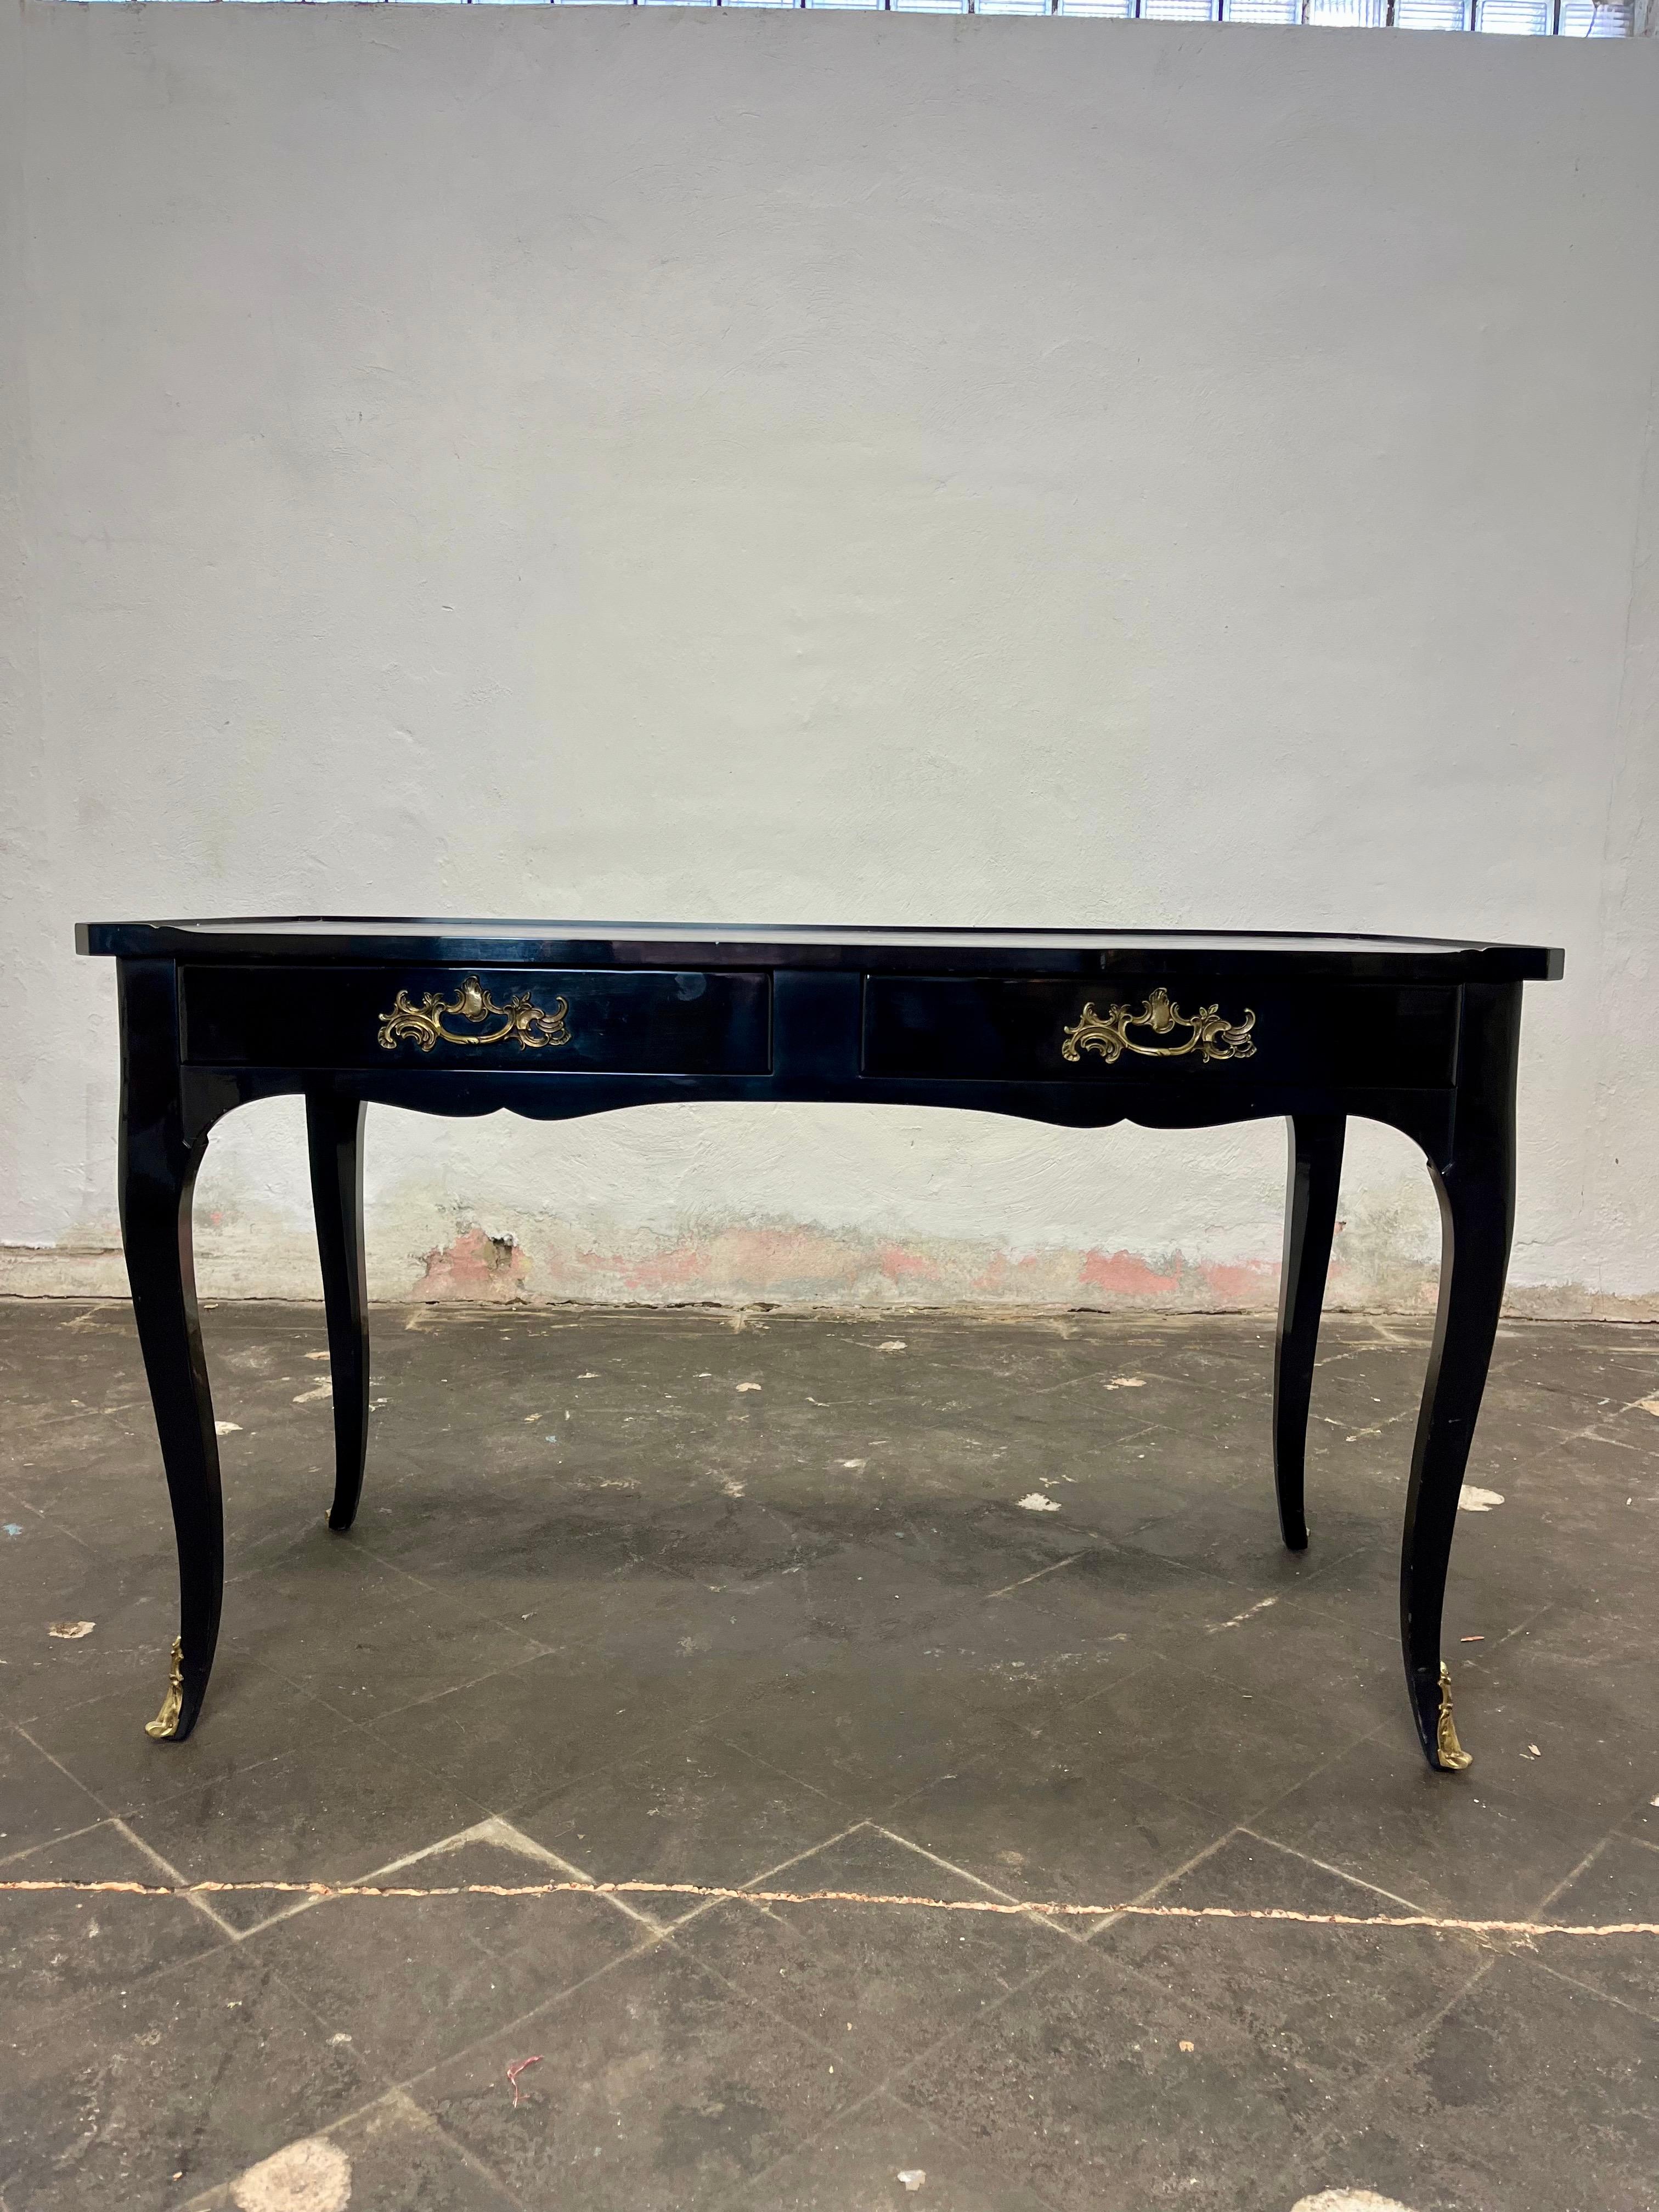 This is a handsome French Louis XV style black lacquered / ebonized desk by Jacques Bodart. The desk has a tooled black leather top and bronze appointments. 2 functioning drawers and 2 faux drawers on opposite side.
Curbside to NYC/Philly $400